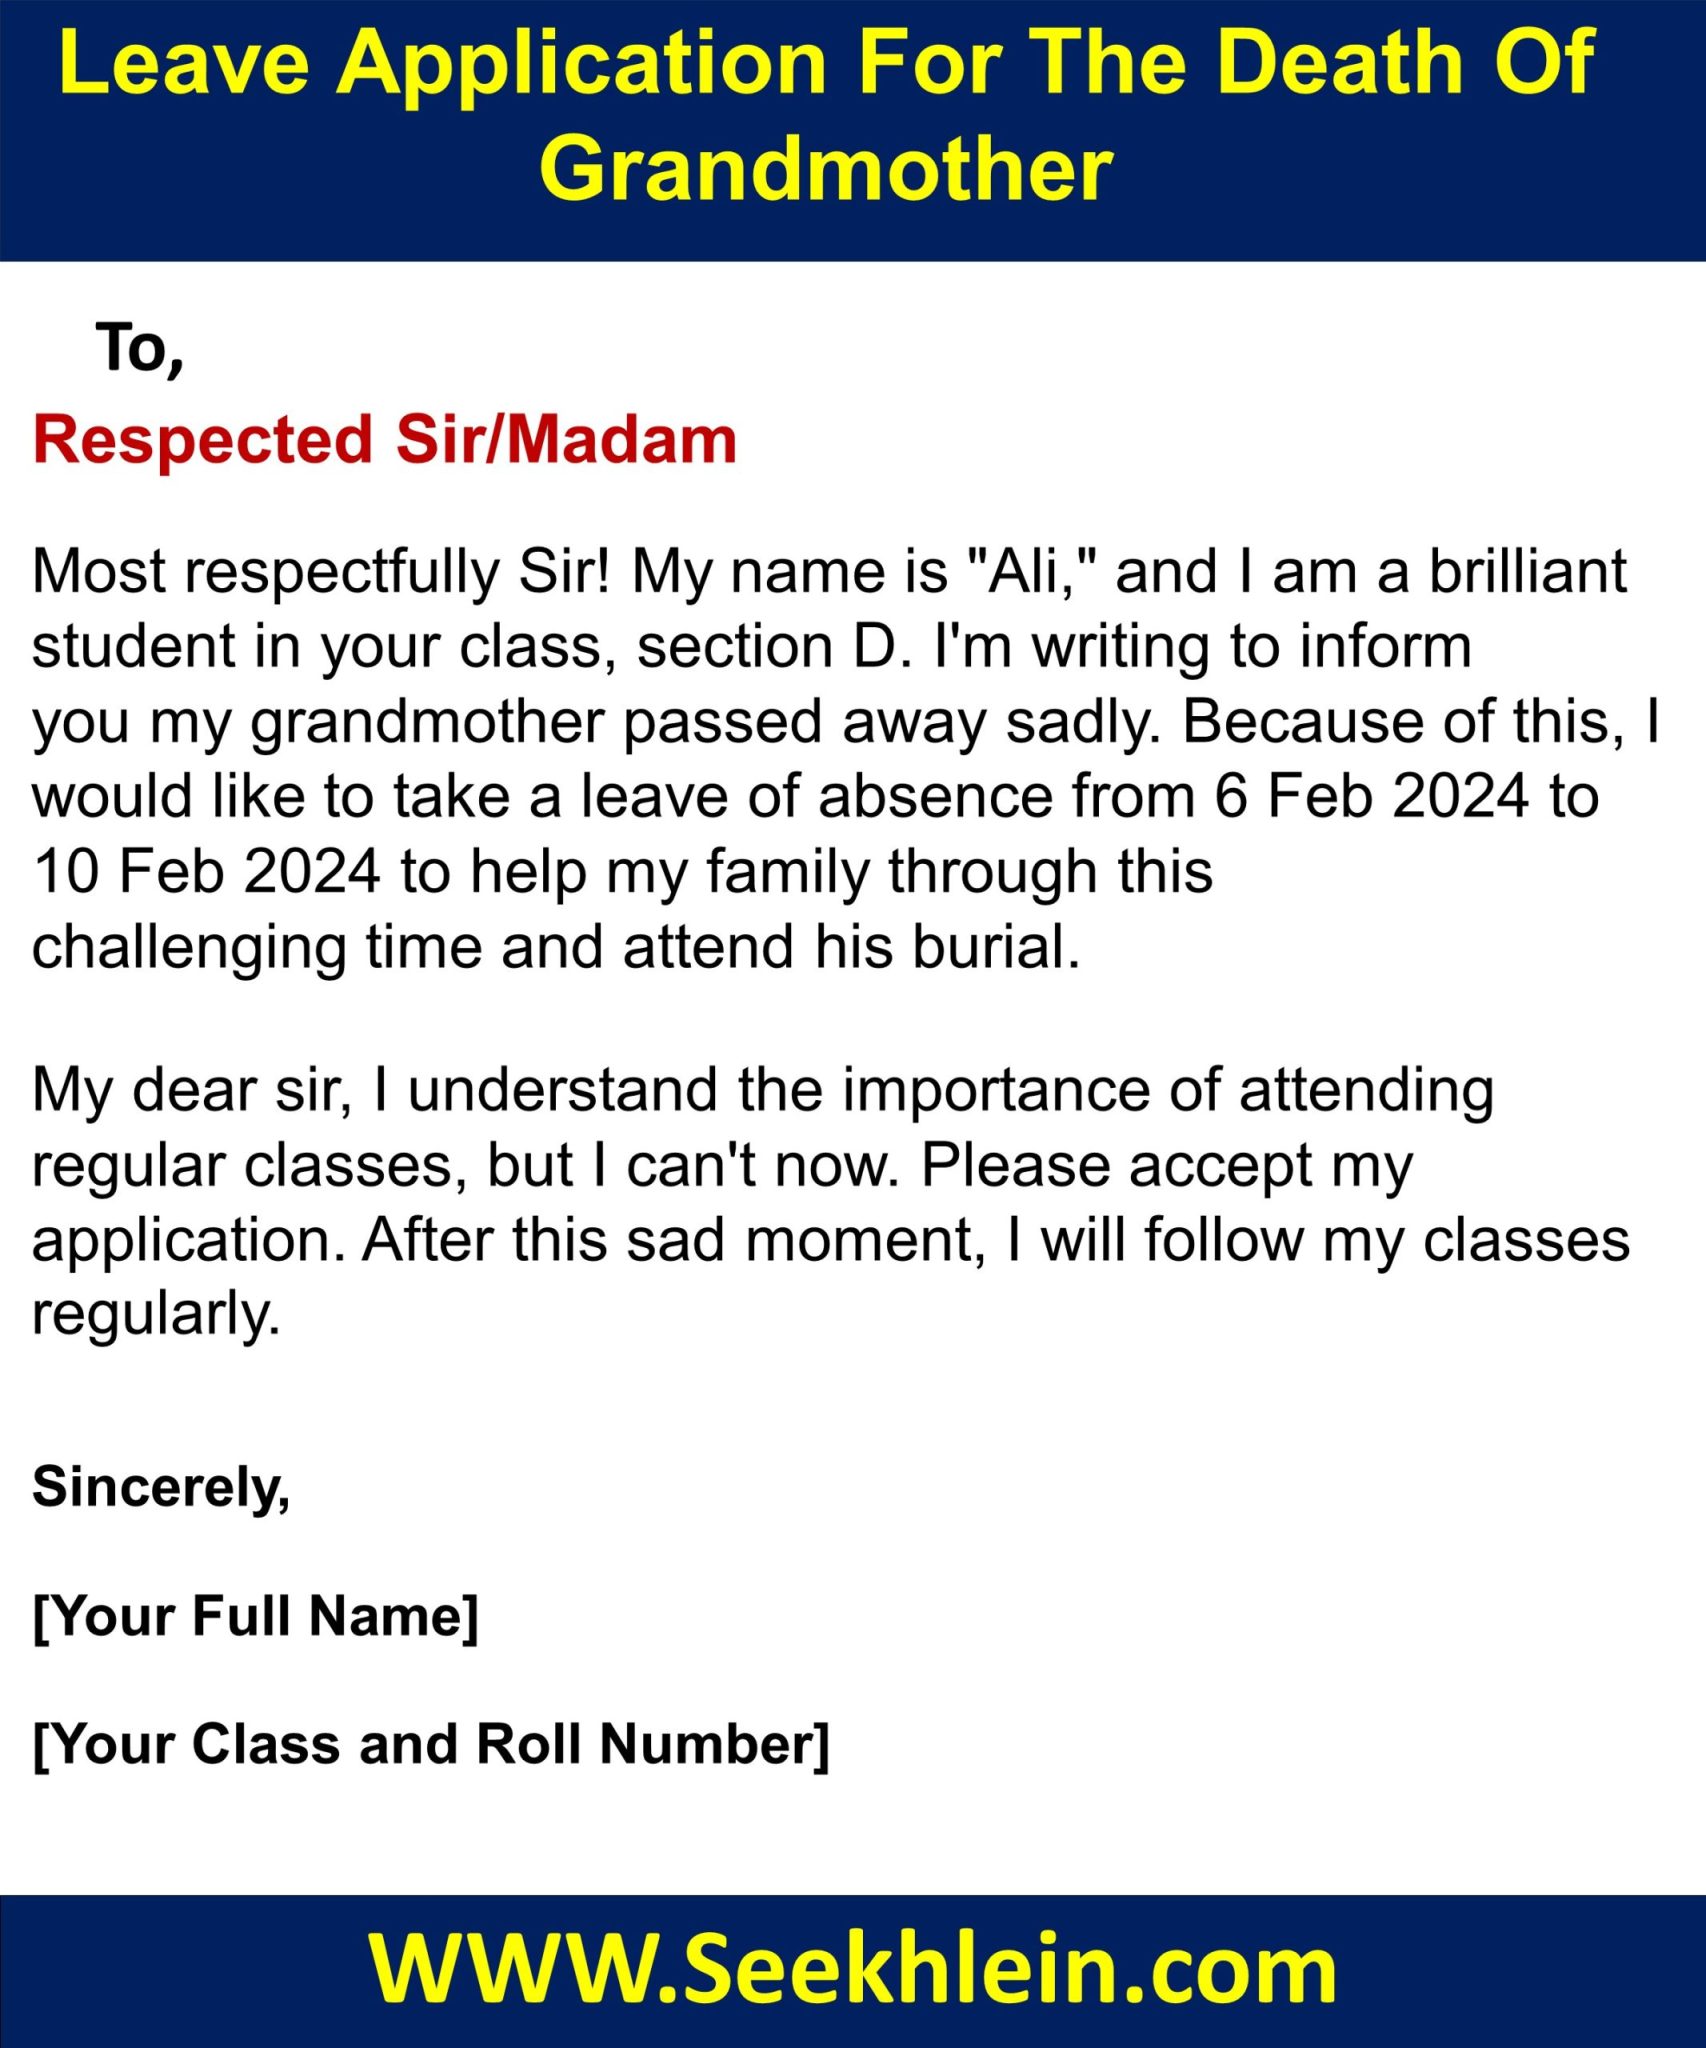 Leave Application For School Due To Grandmother's Death